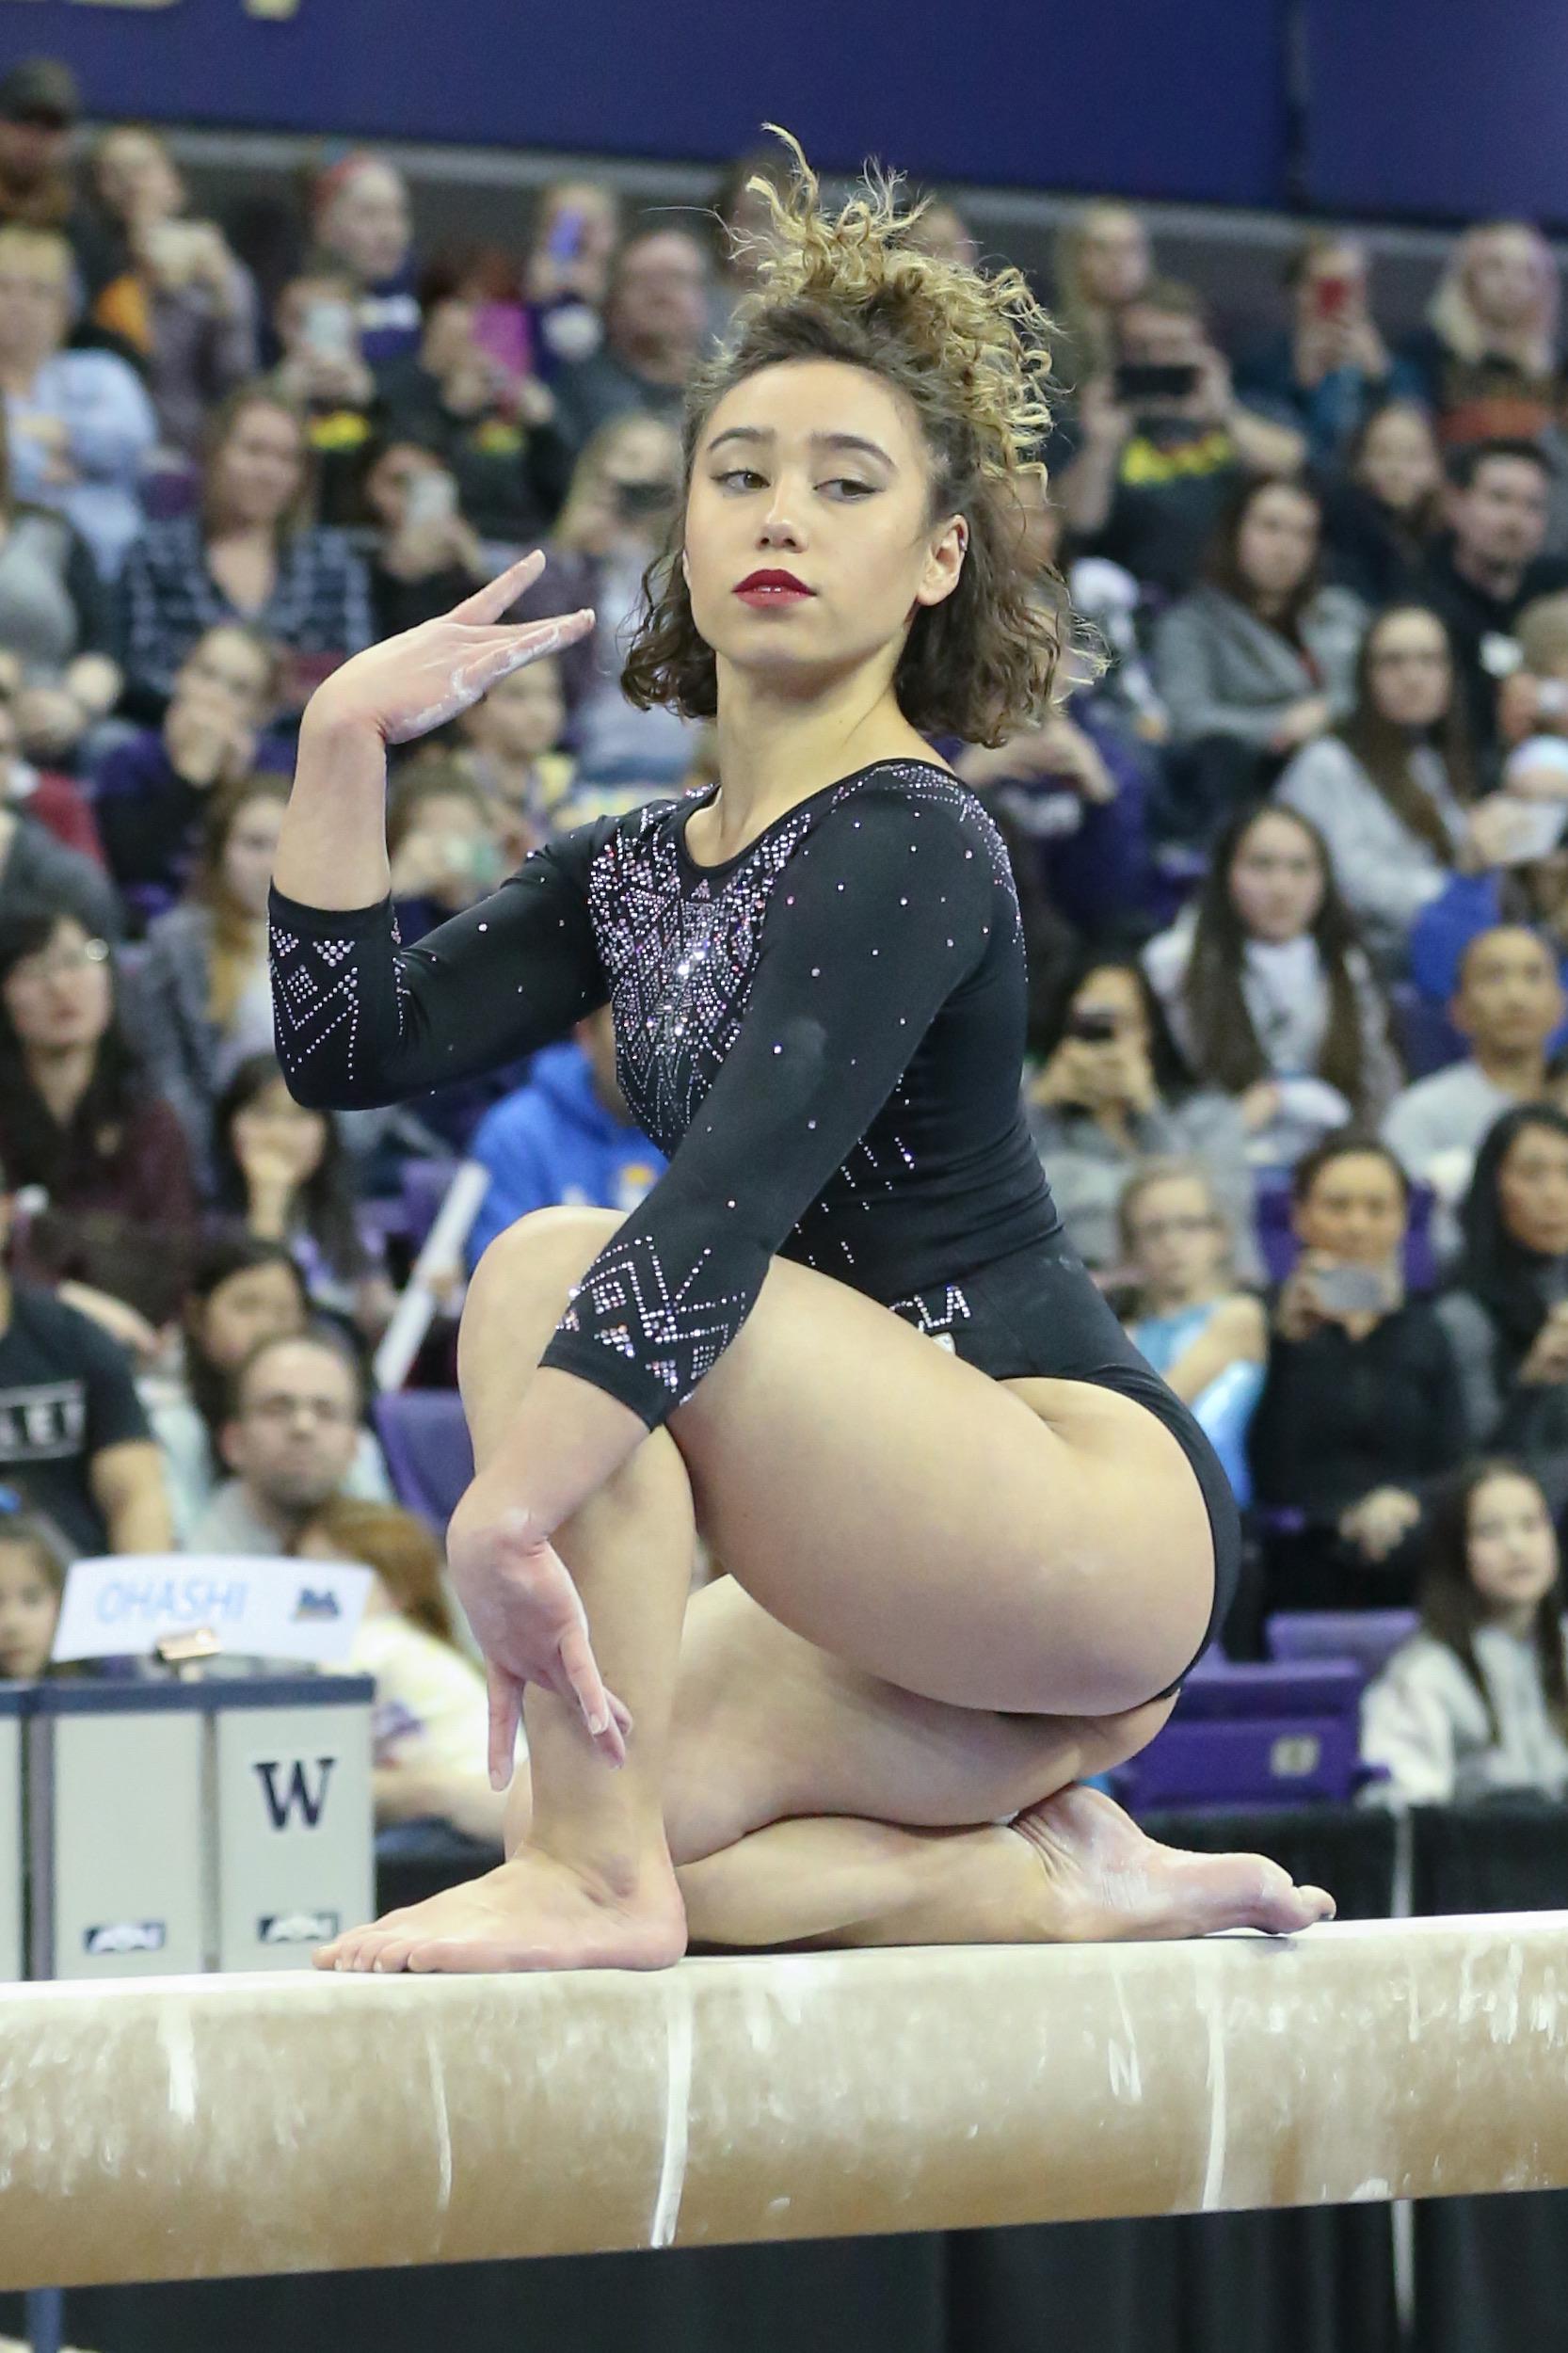 I don't know why I feel so fixated on Katelyn Ohashi this morning but I do know I need to do something about it